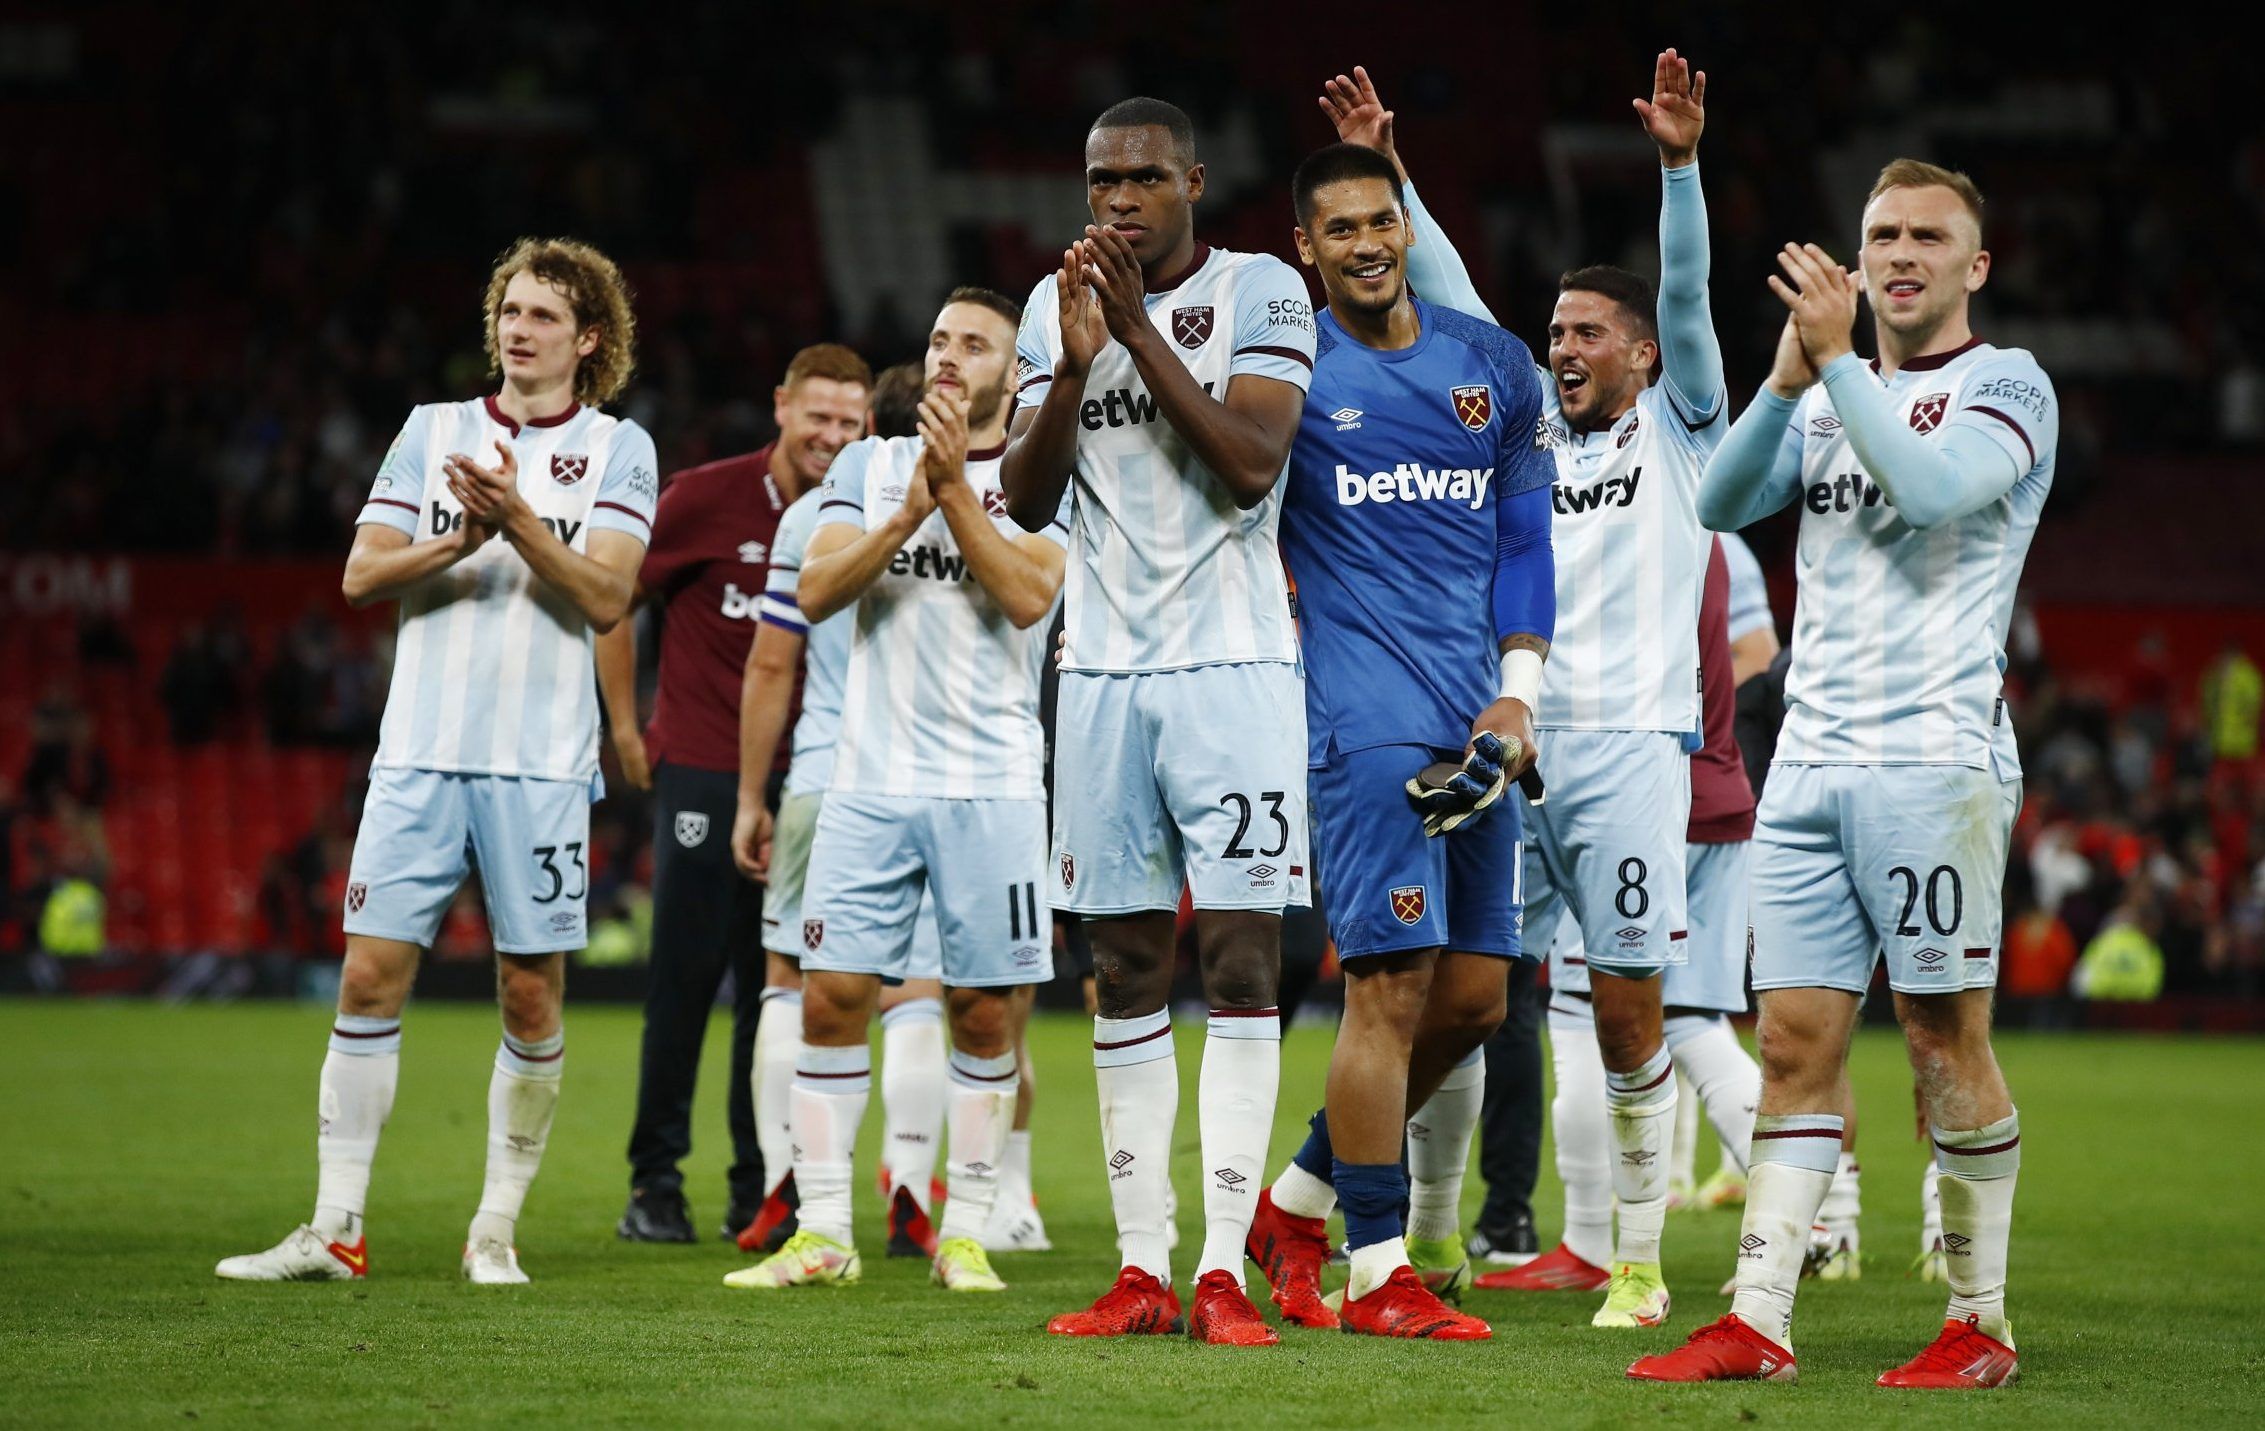 West Ham players celebrate win over Manchester United in the Carabao Cup at Old Trafford